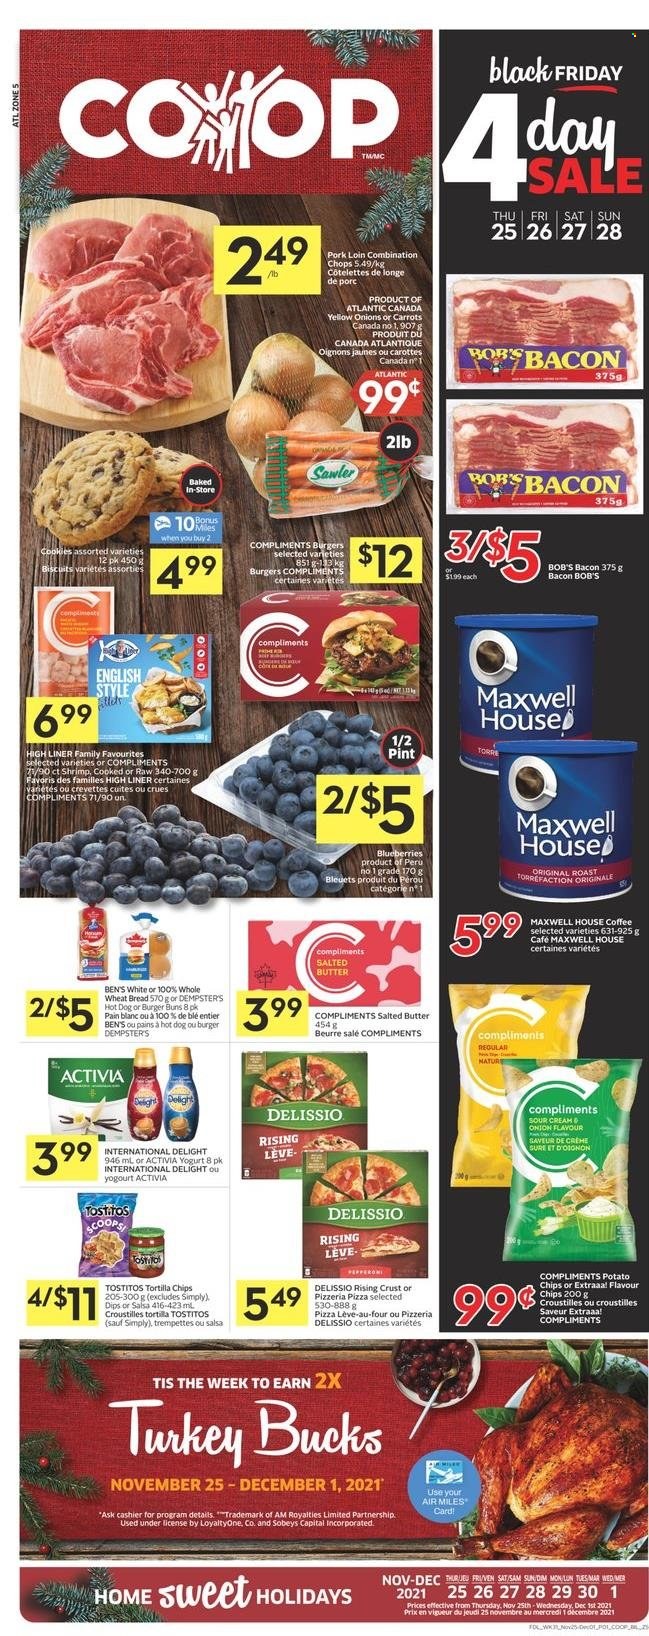 Co-op Flyer - November 25, 2021 - December 01, 2021 - Sales products - wheat bread, buns, burger buns, carrots, onion, blueberries, shrimps, hot dog, pizza, bacon, yoghurt, Activia, butter, salted butter, sour cream, biscuit, tortilla chips, potato chips, Tostitos, salsa, Maxwell House, coffee, pork loin, pork meat, chips. Page 1.